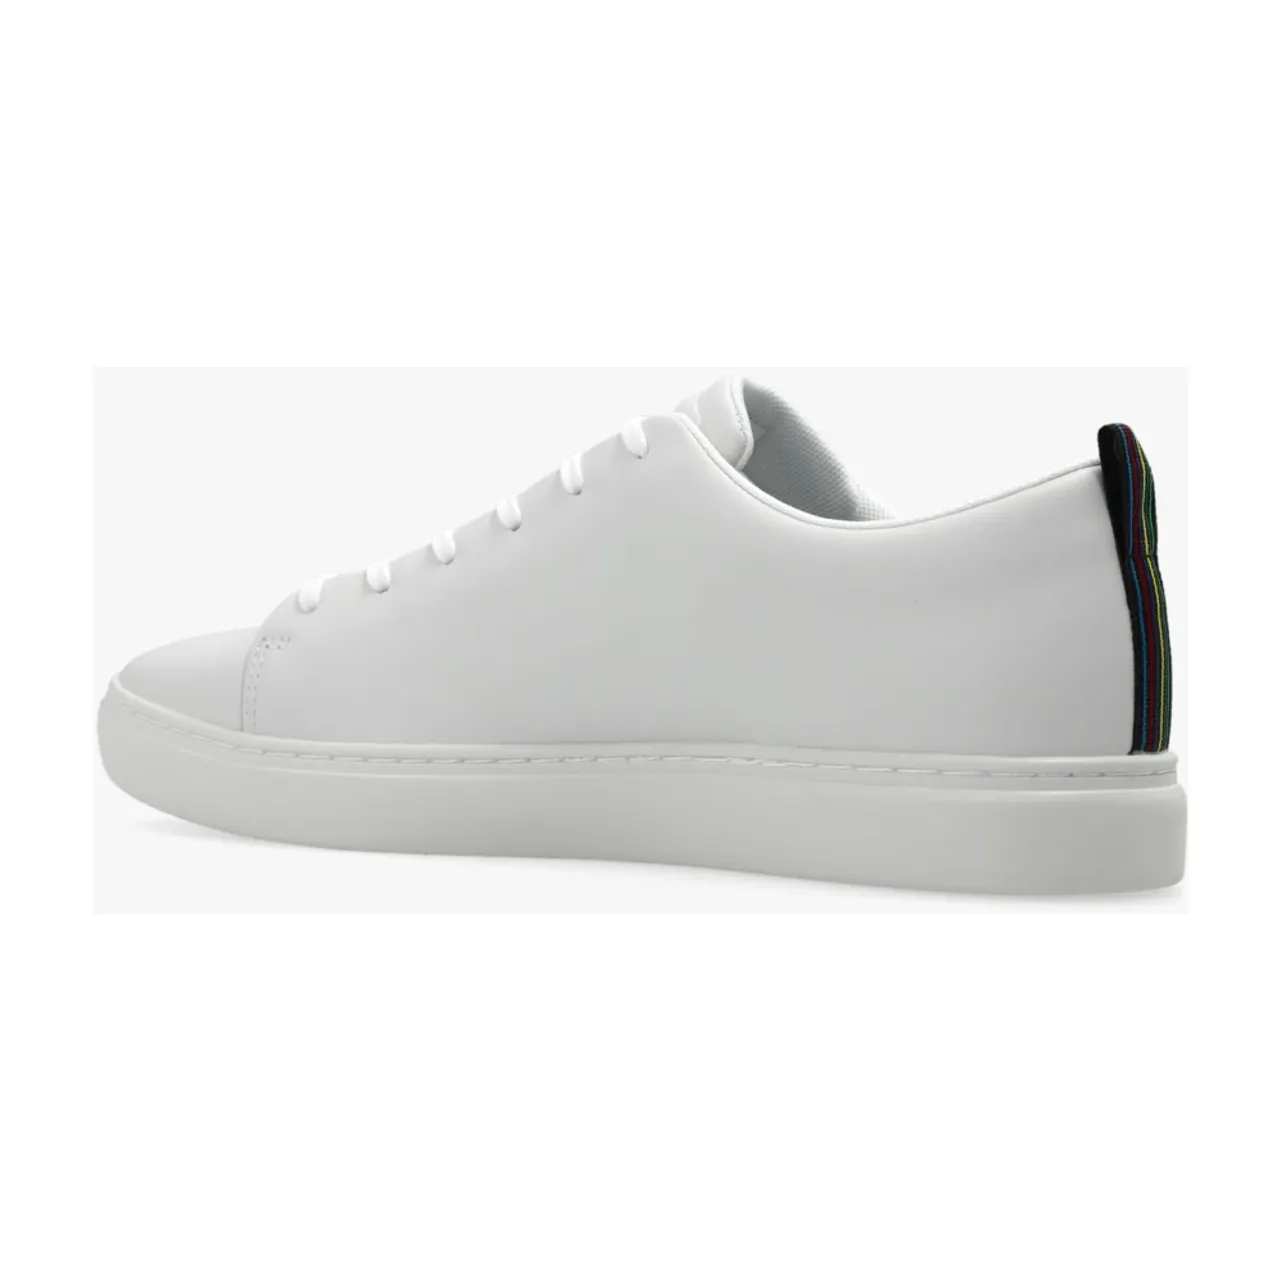 ‘Lee’ Sneakers PS By Paul Smith